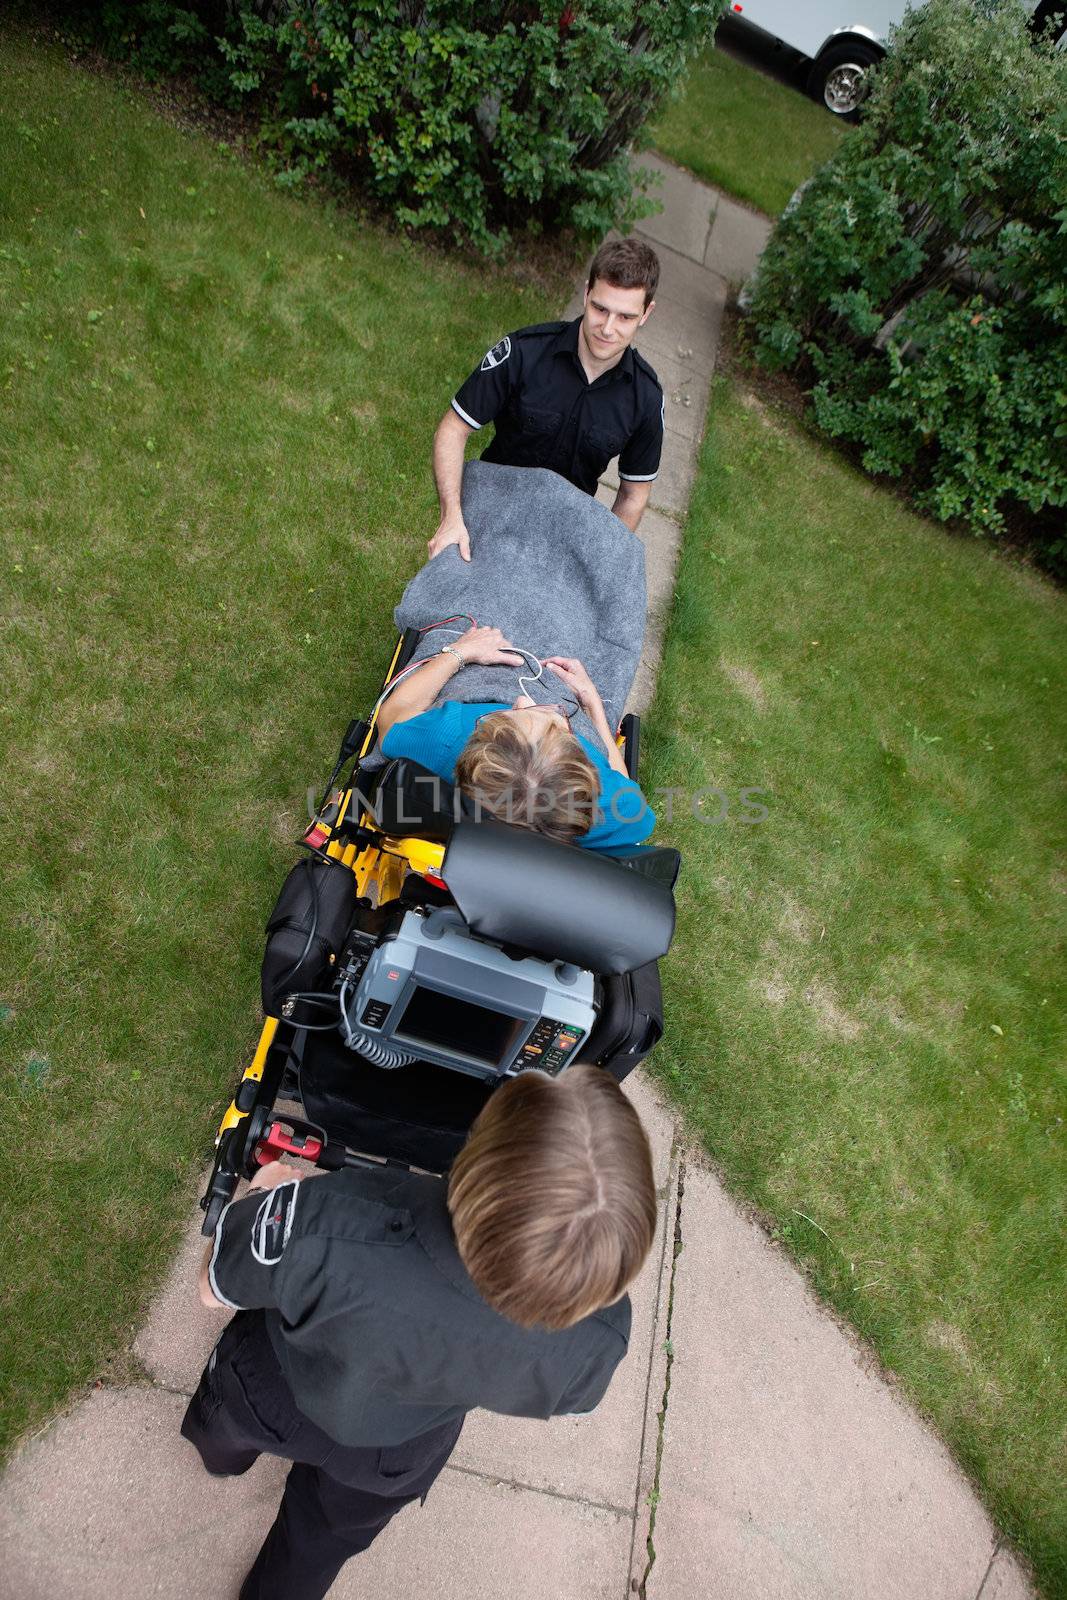 Overhead view of emergency medical team pushing senior woman on stretcher.  Shallow DOF sharp focus on patient